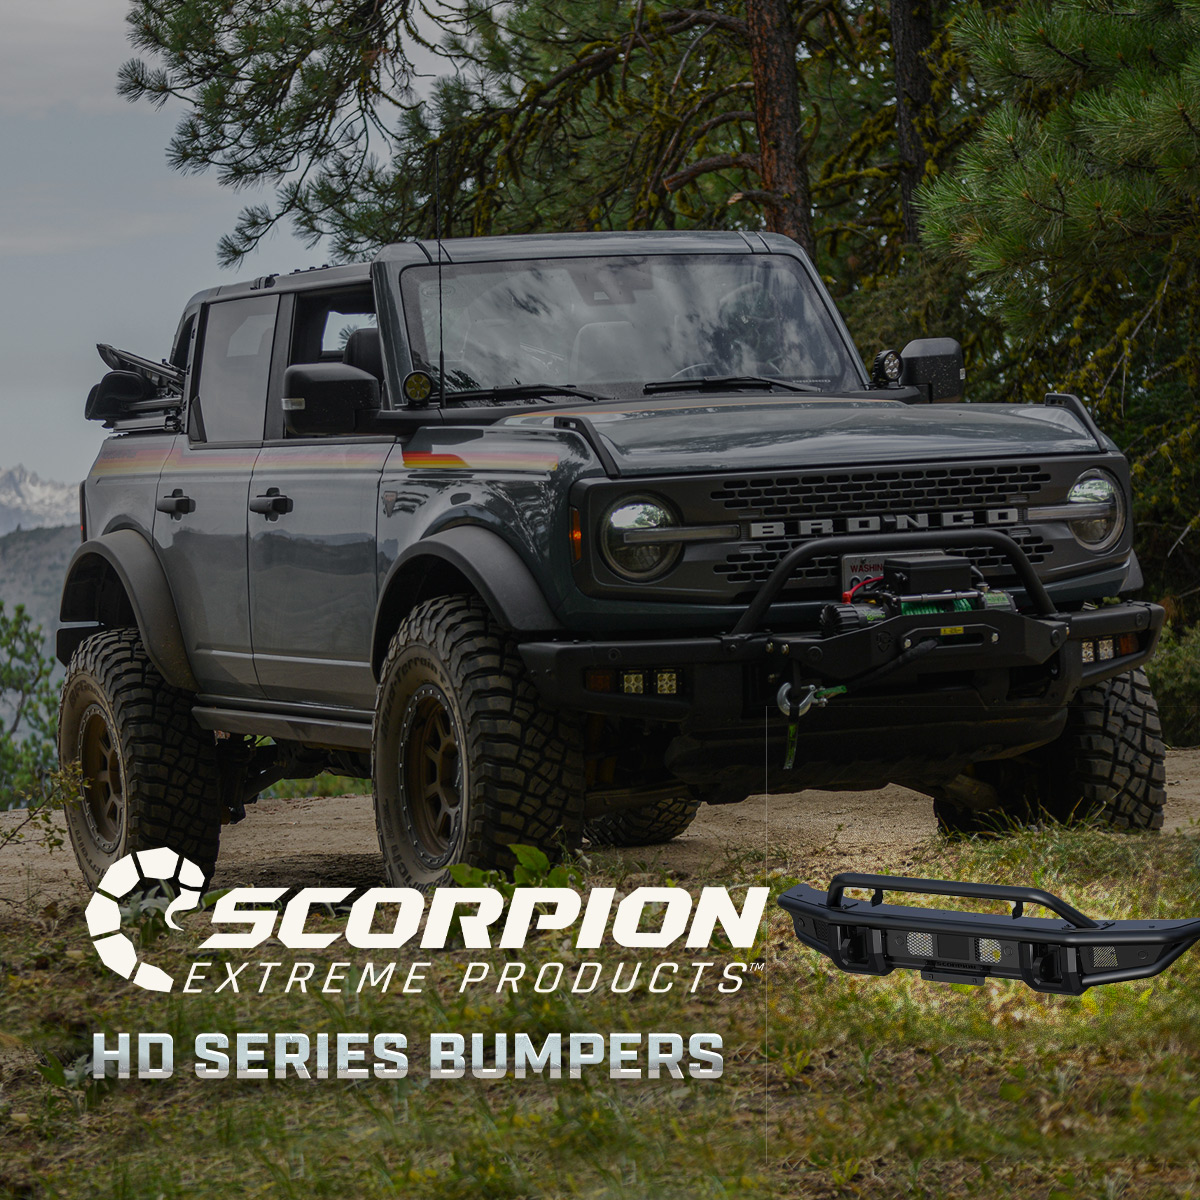 Scorpion Extreme Products HD Bumpers